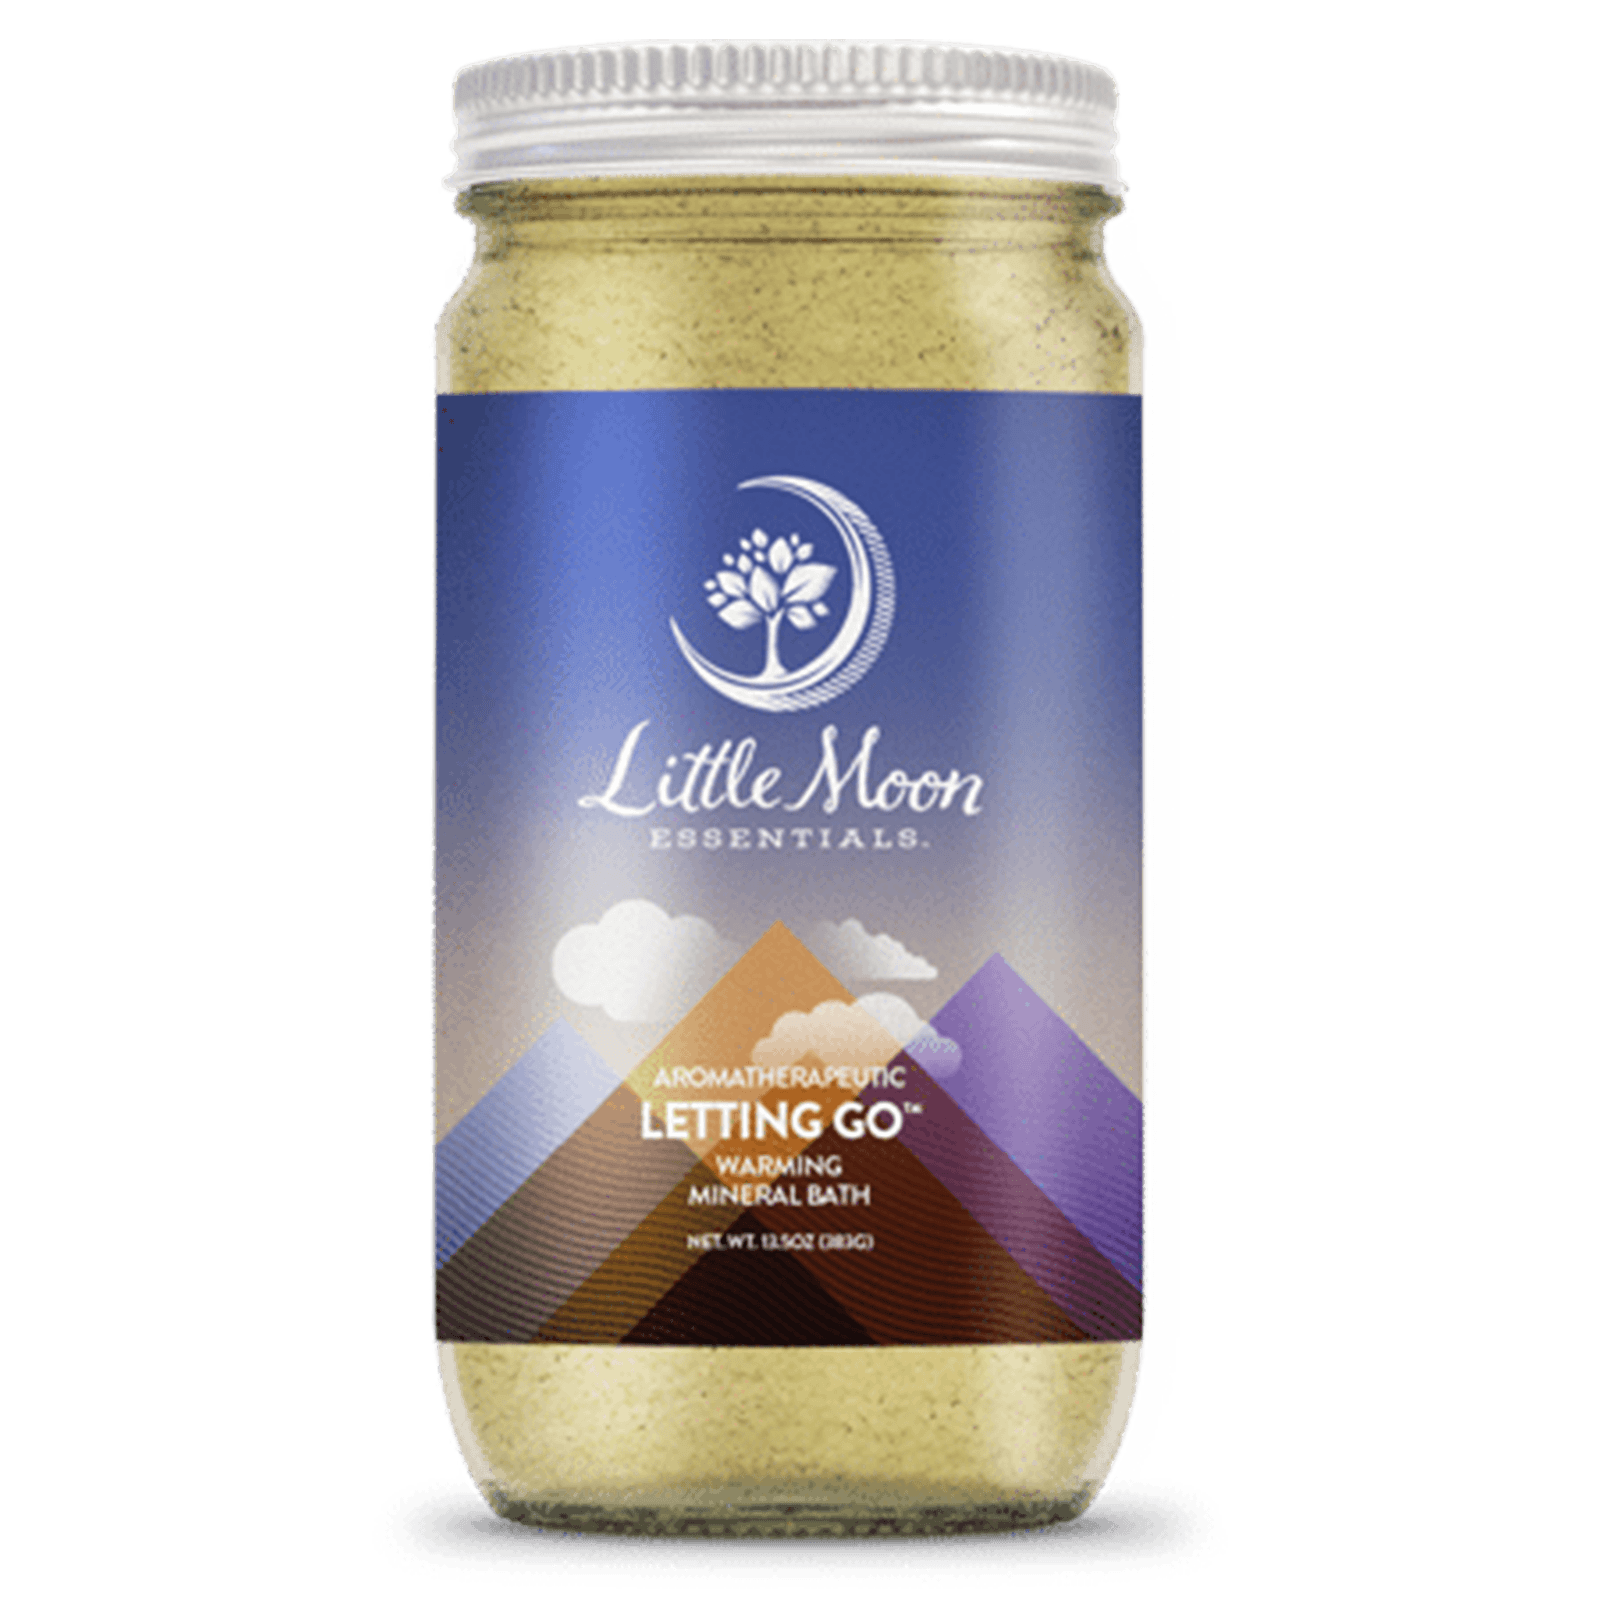 Letting Go™ Mineral Bath - Little Moon Essentials